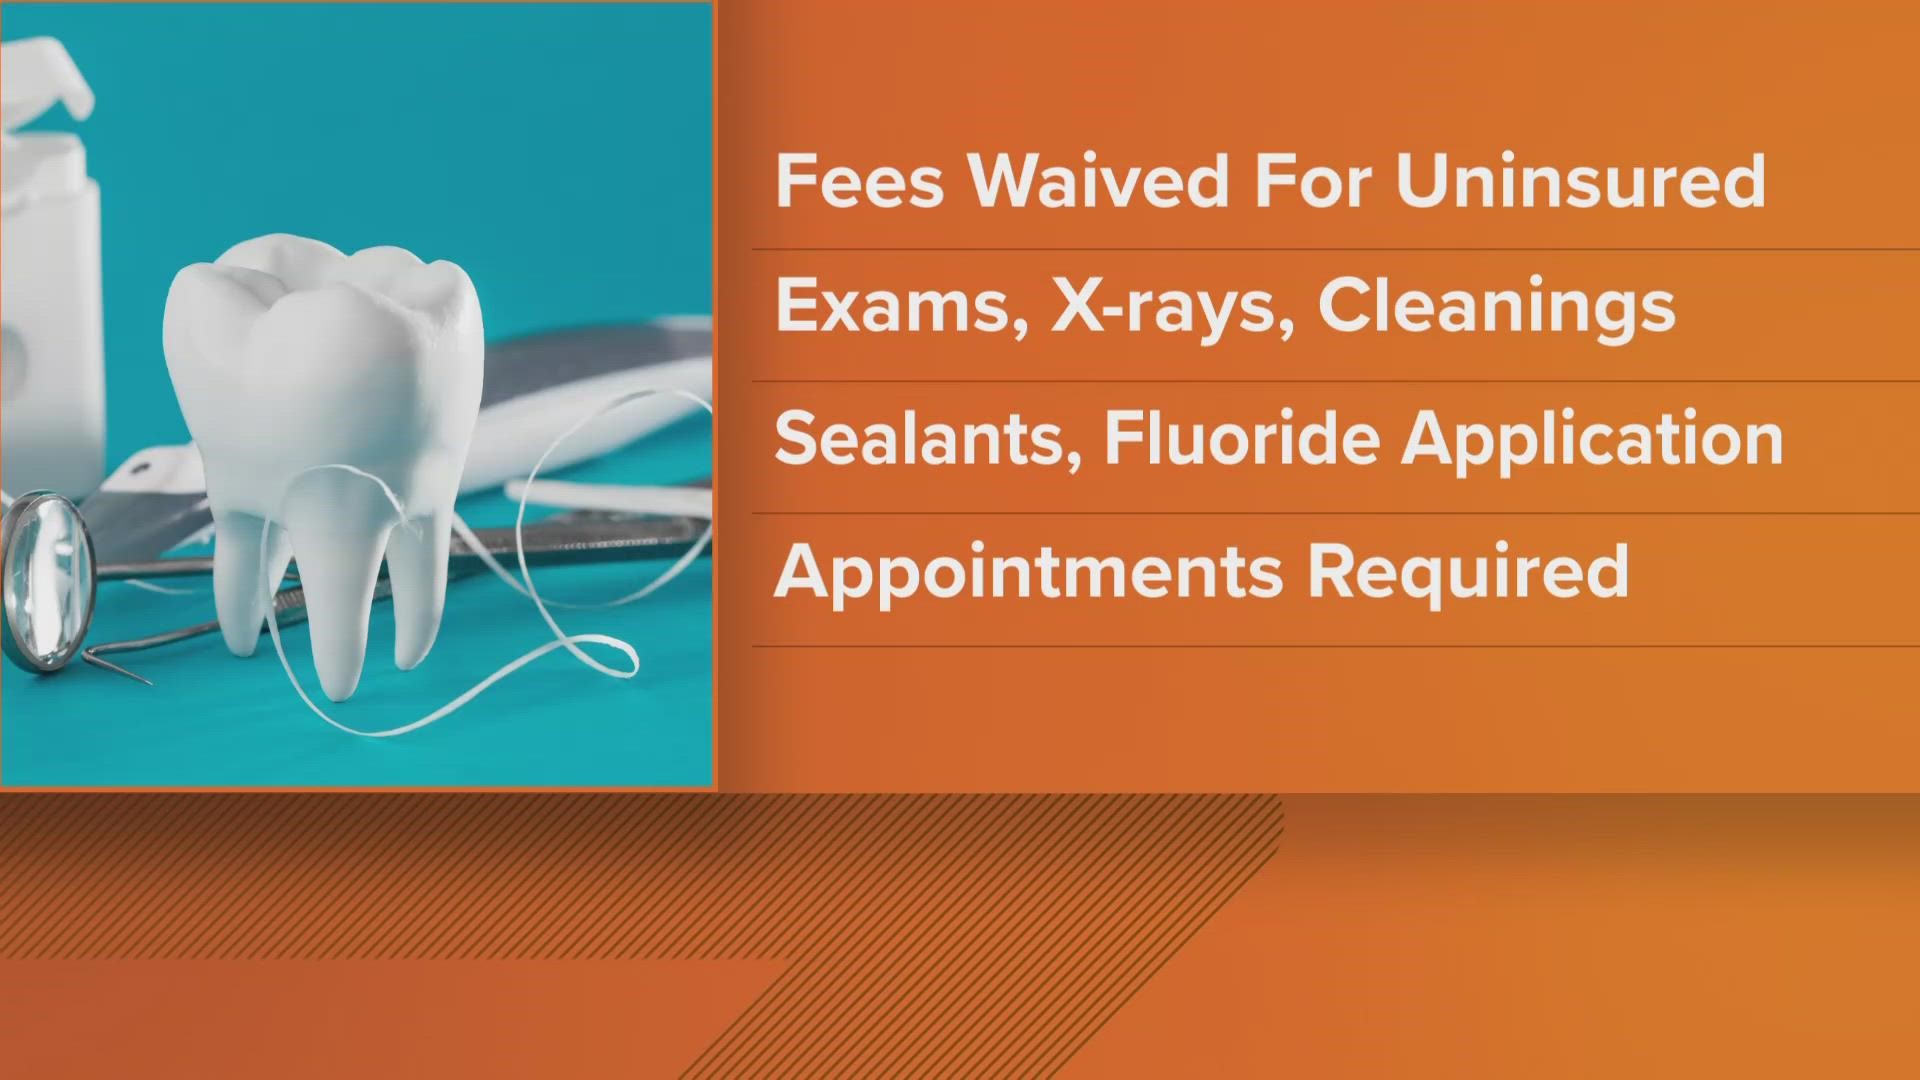 Services offered include exams, X-rays, cleanings, sealants and fluoride applications.